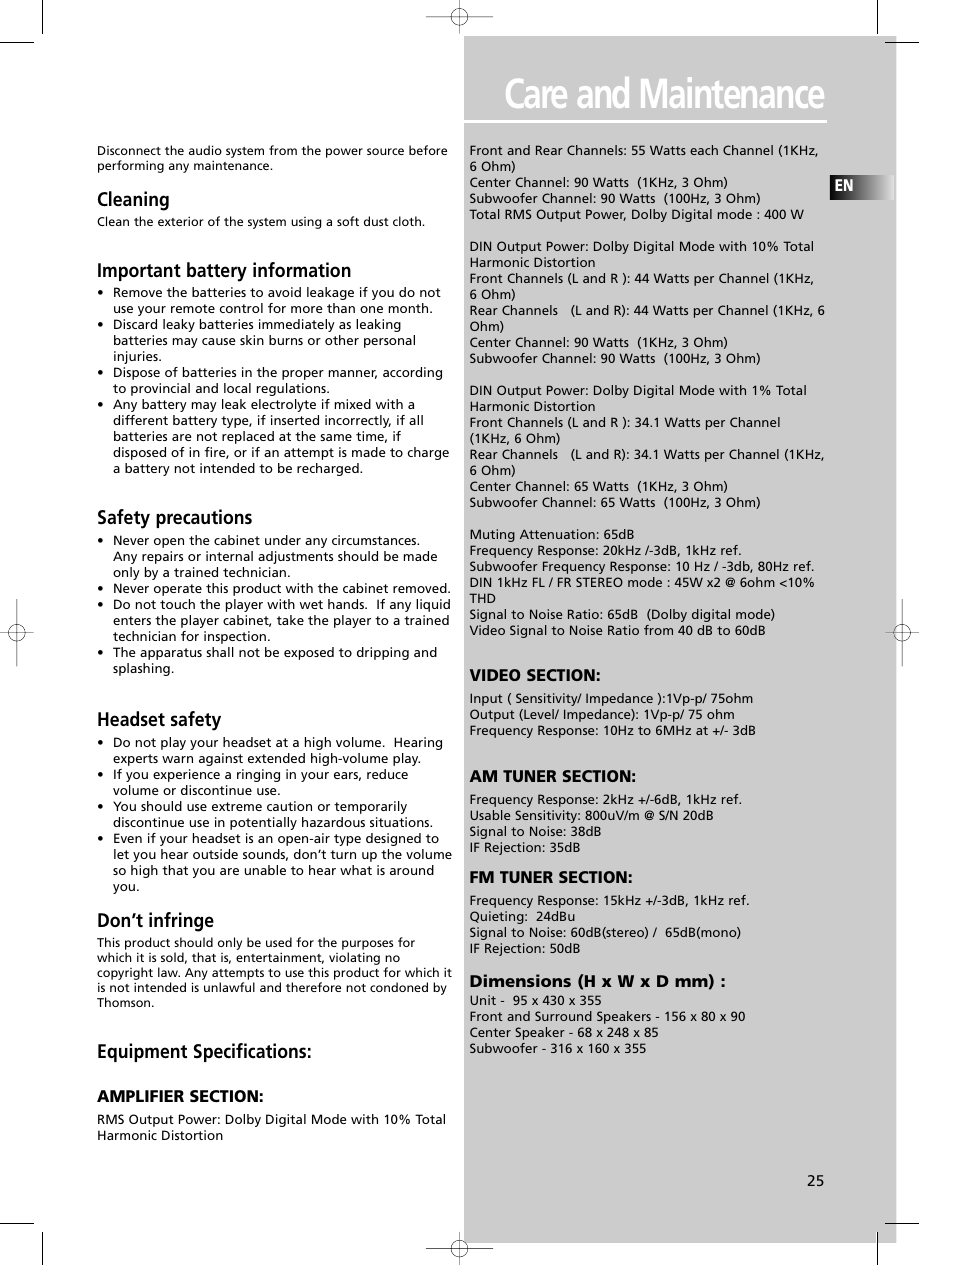 Care and maintenance, Cleaning, Important battery information | Technicolor  - Thomson DPL580HT User Manual | Page 28 / 28 | Original mode